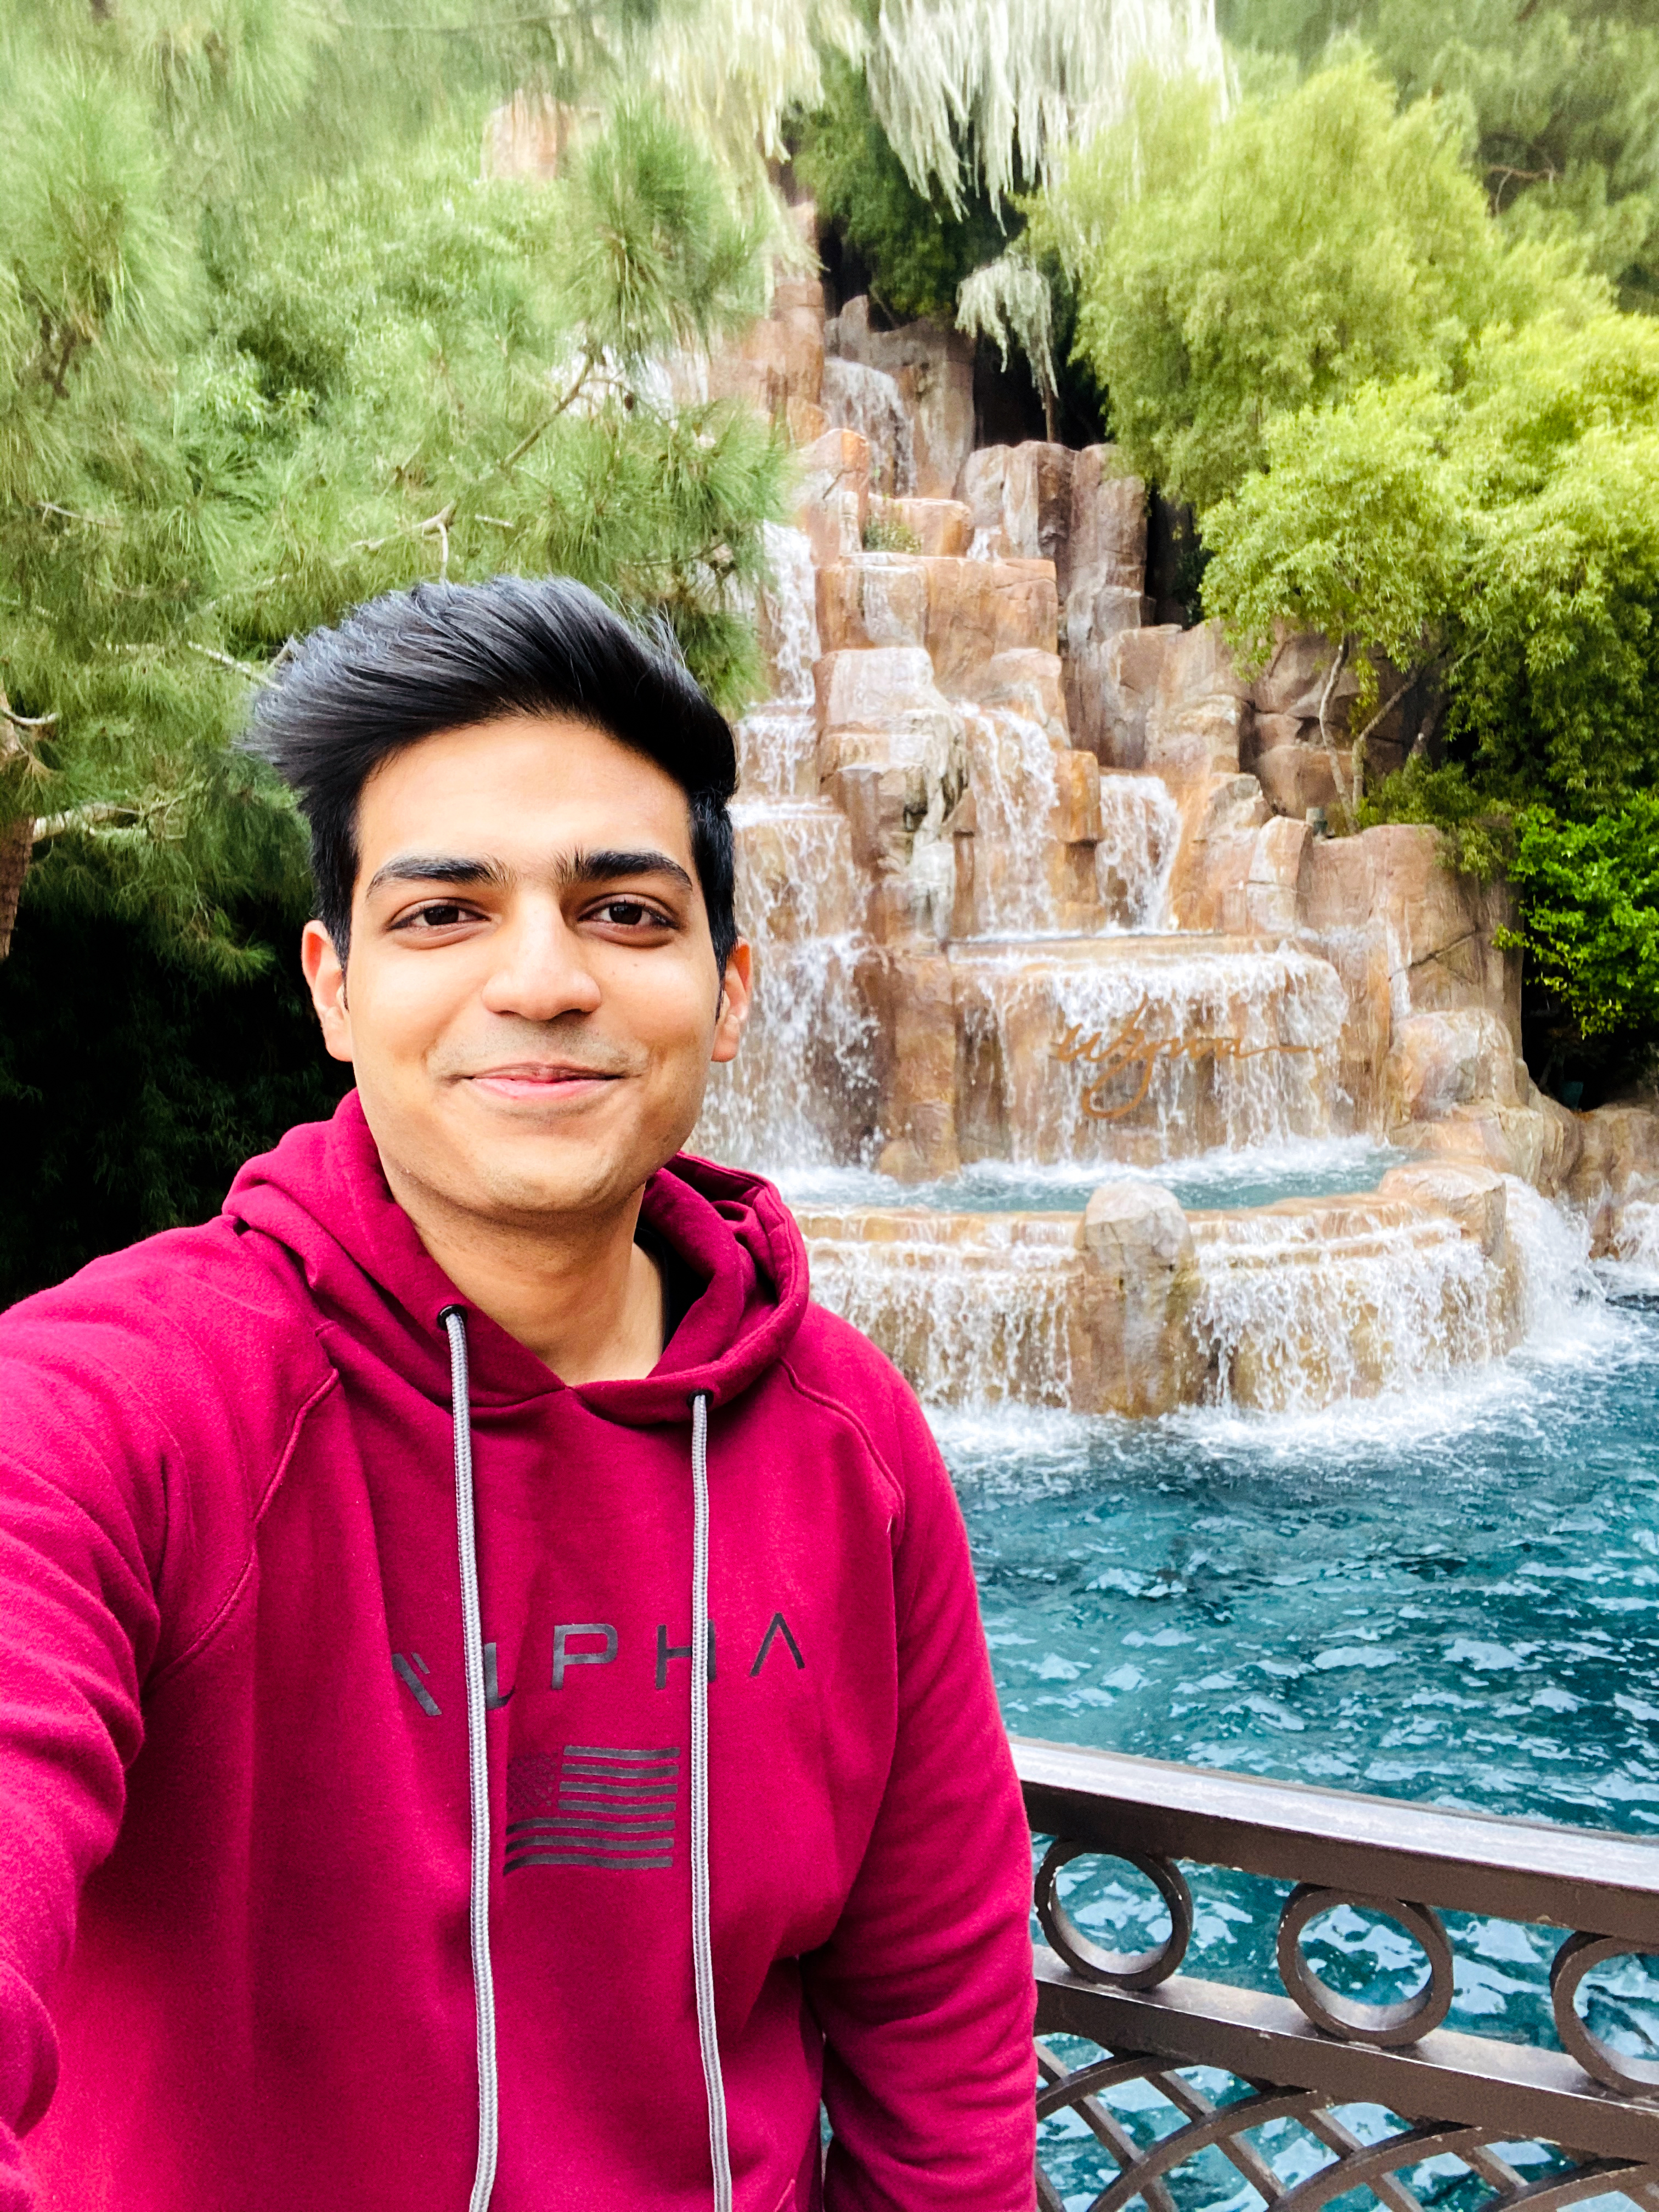 a young man smiles at the camera and poses in front of a waterfall